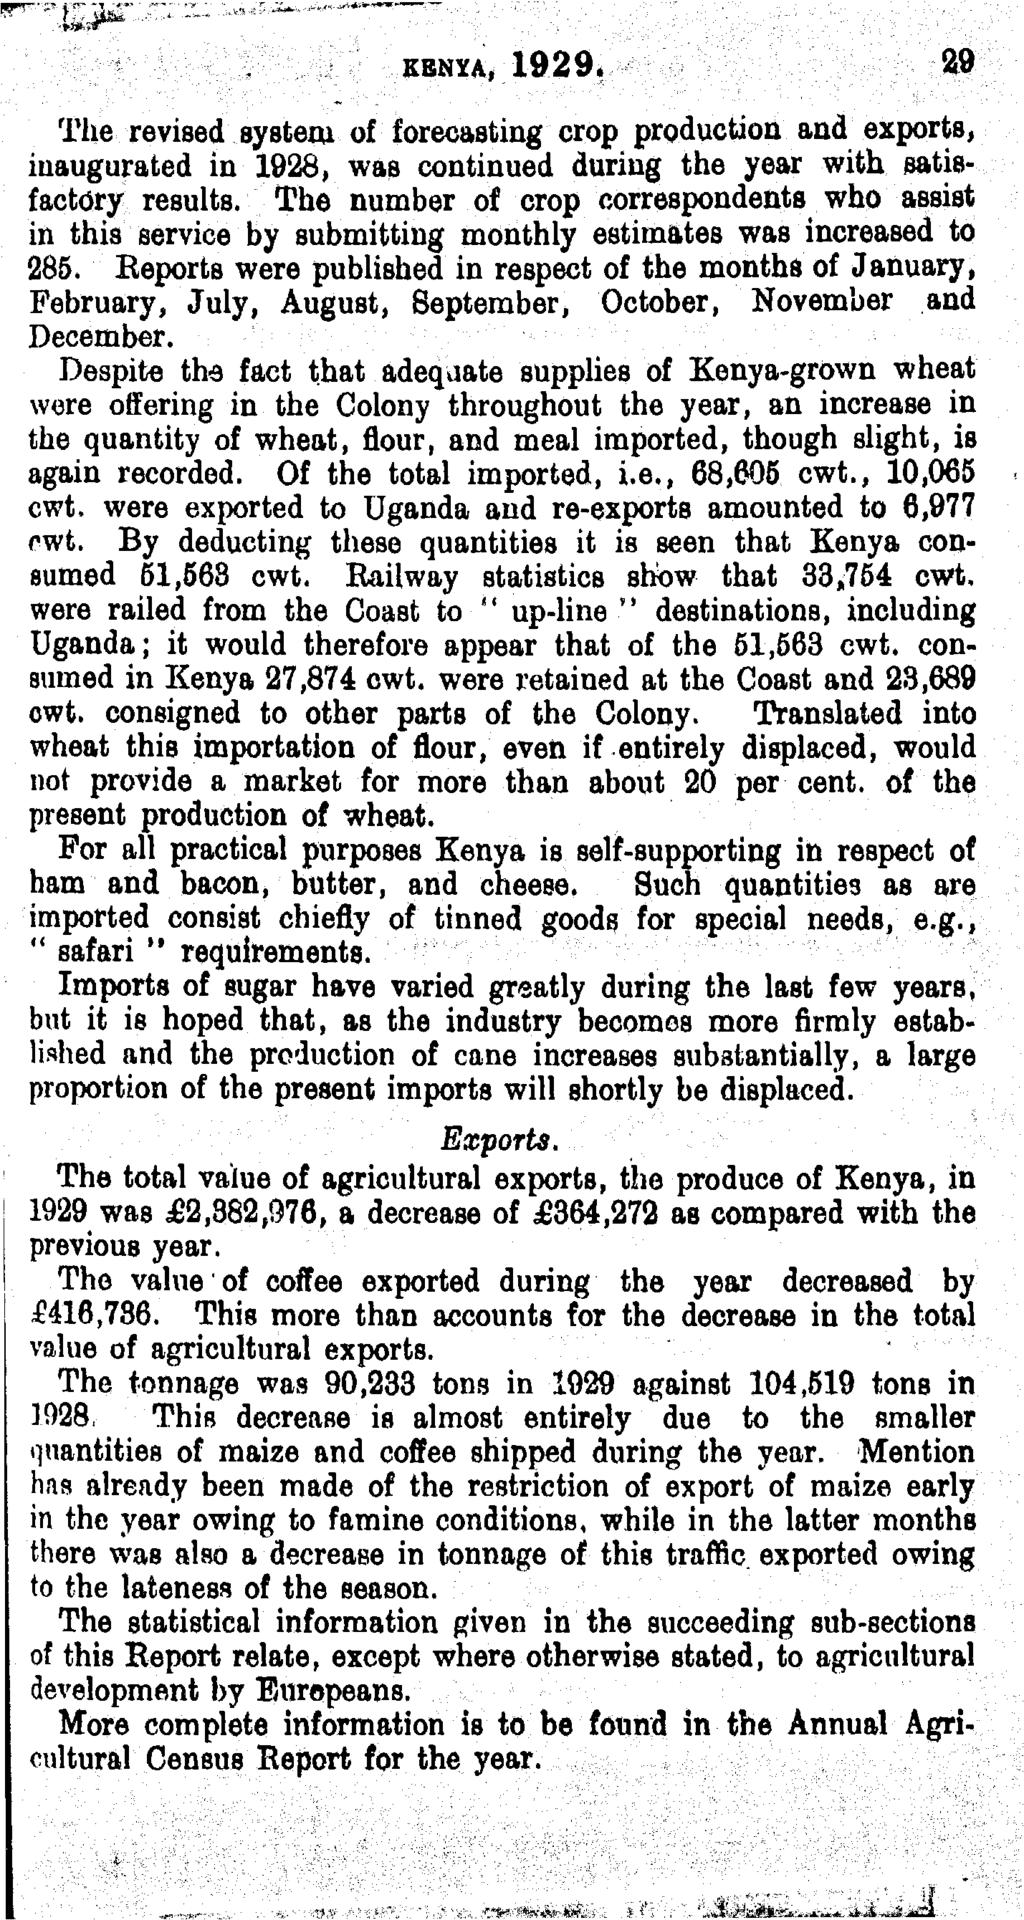 KENYA, 1929. 29 The revised system of forecasting crop production and exports, inaugurated in 1928, was continued during the year with satisfactory results.